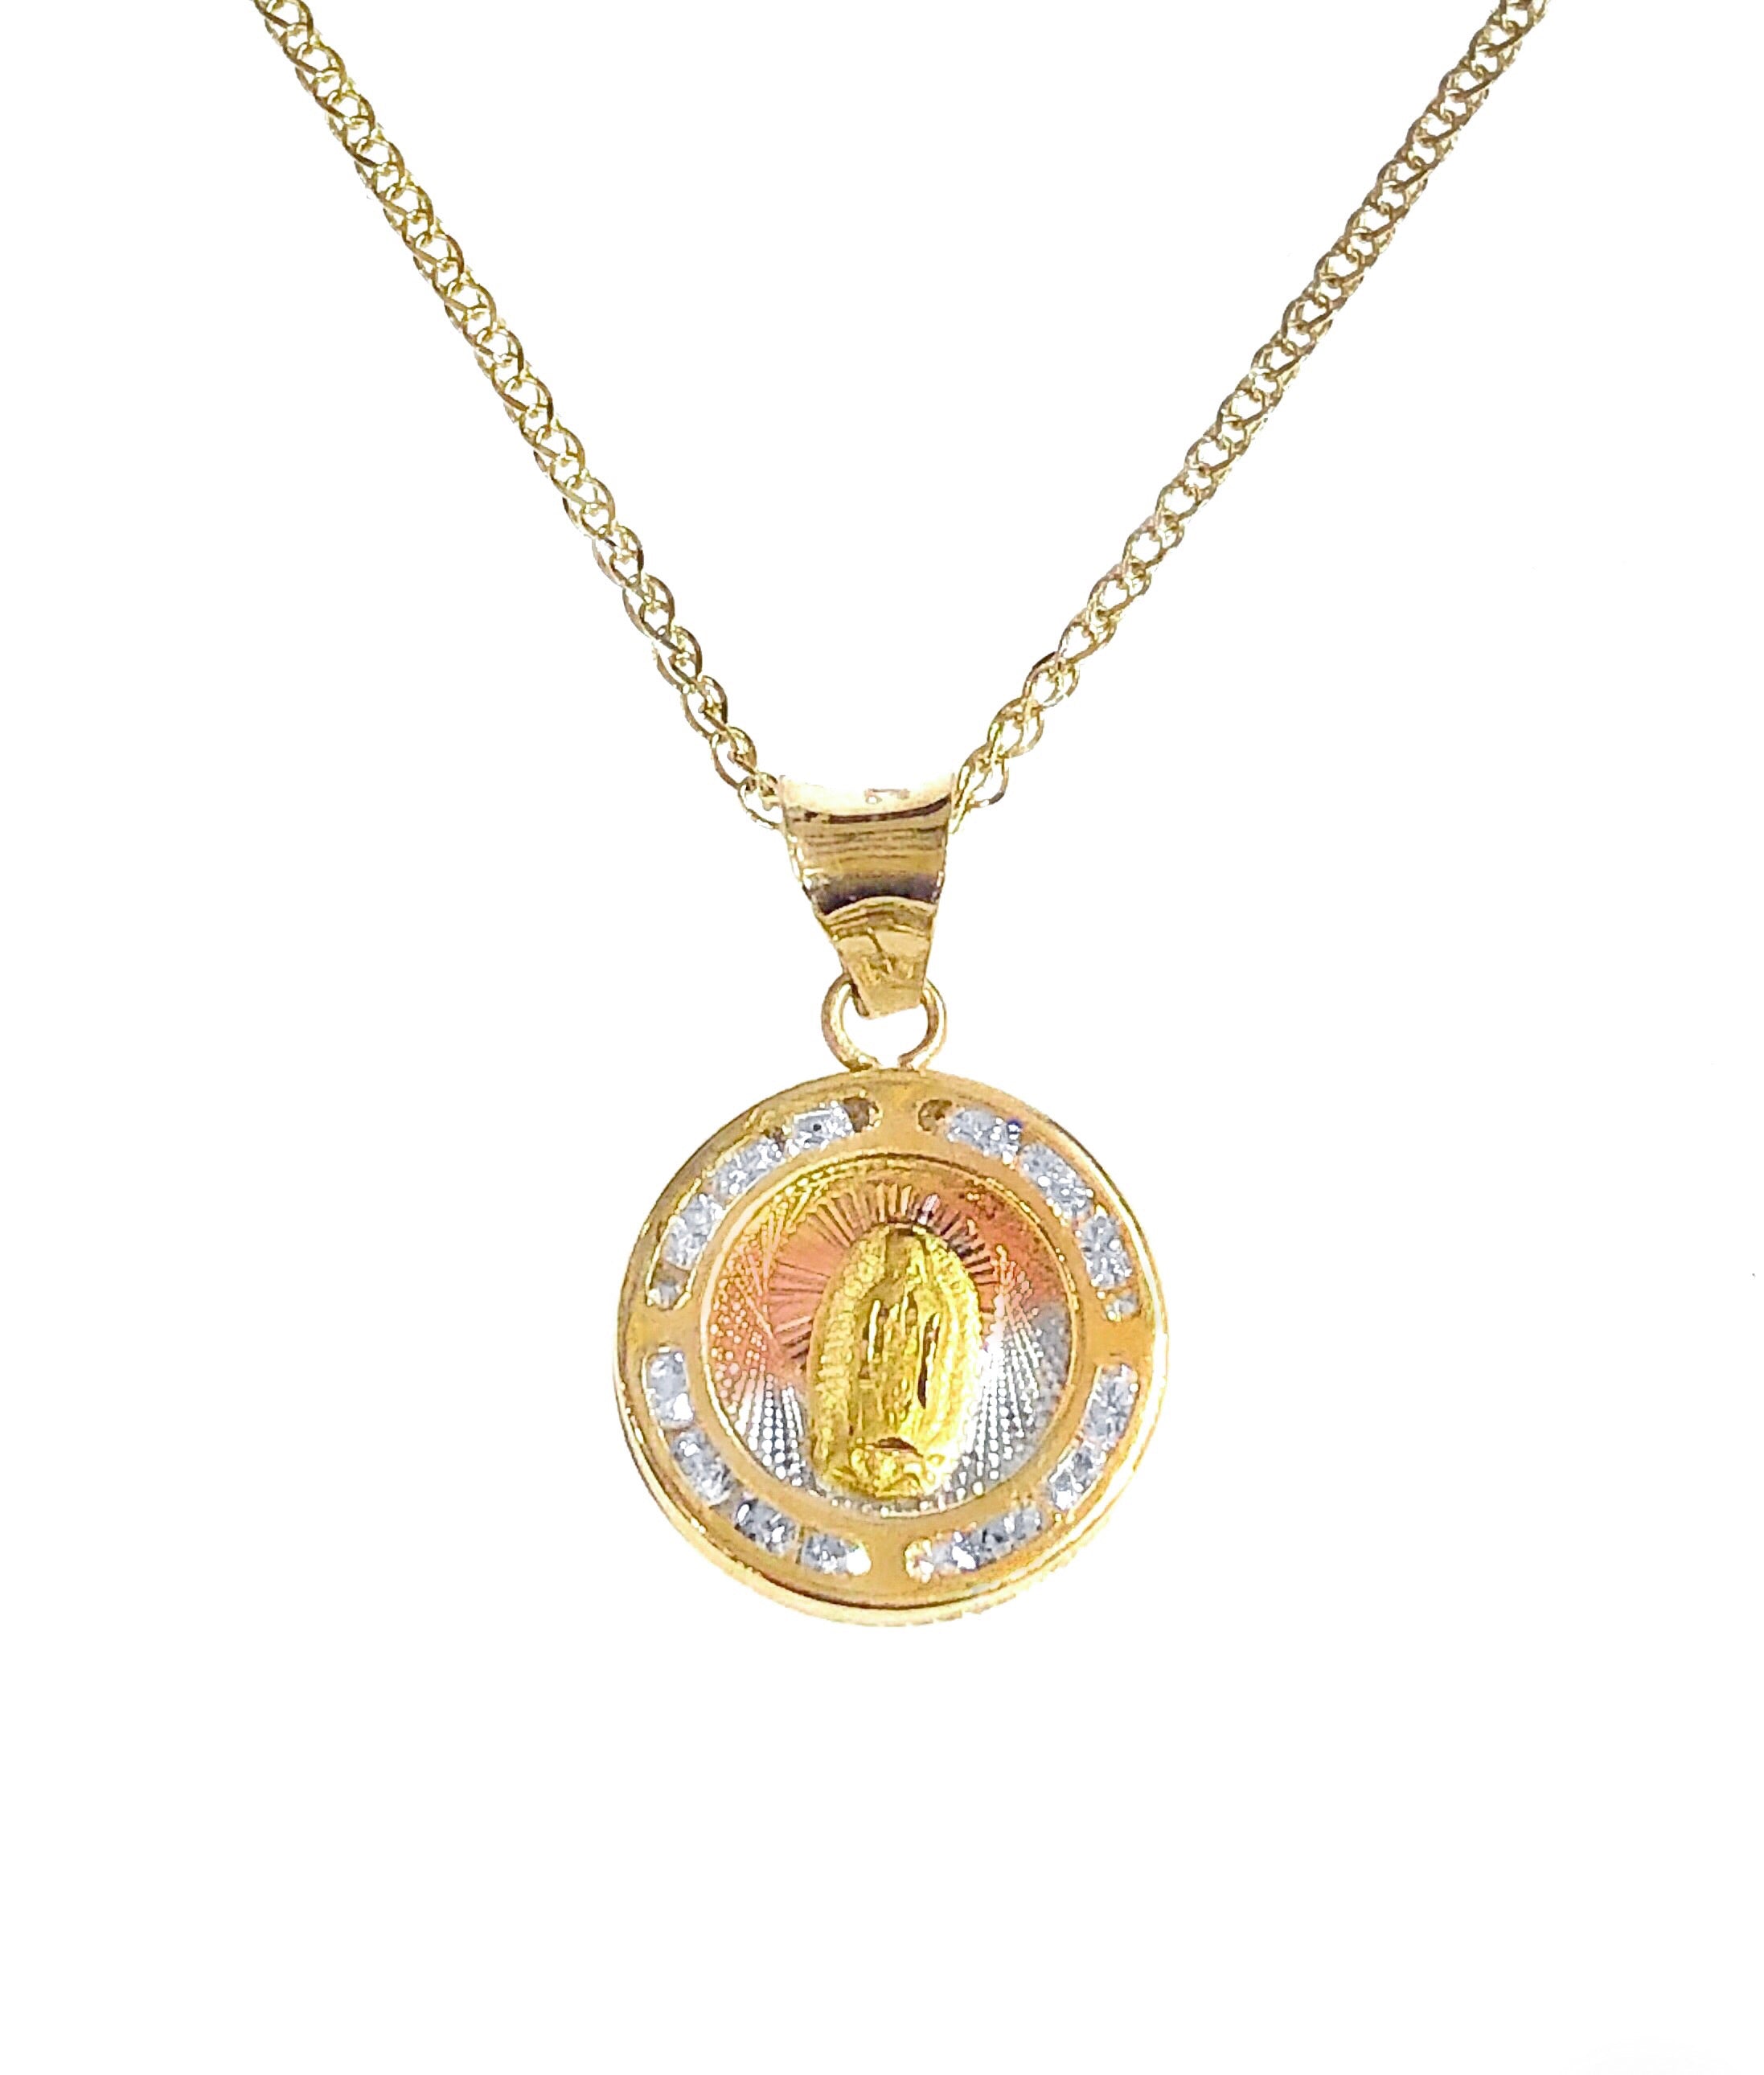 14K TRICOLOR GOLD MINI ROUND PAVE VIRGIN MARY NECKLACE